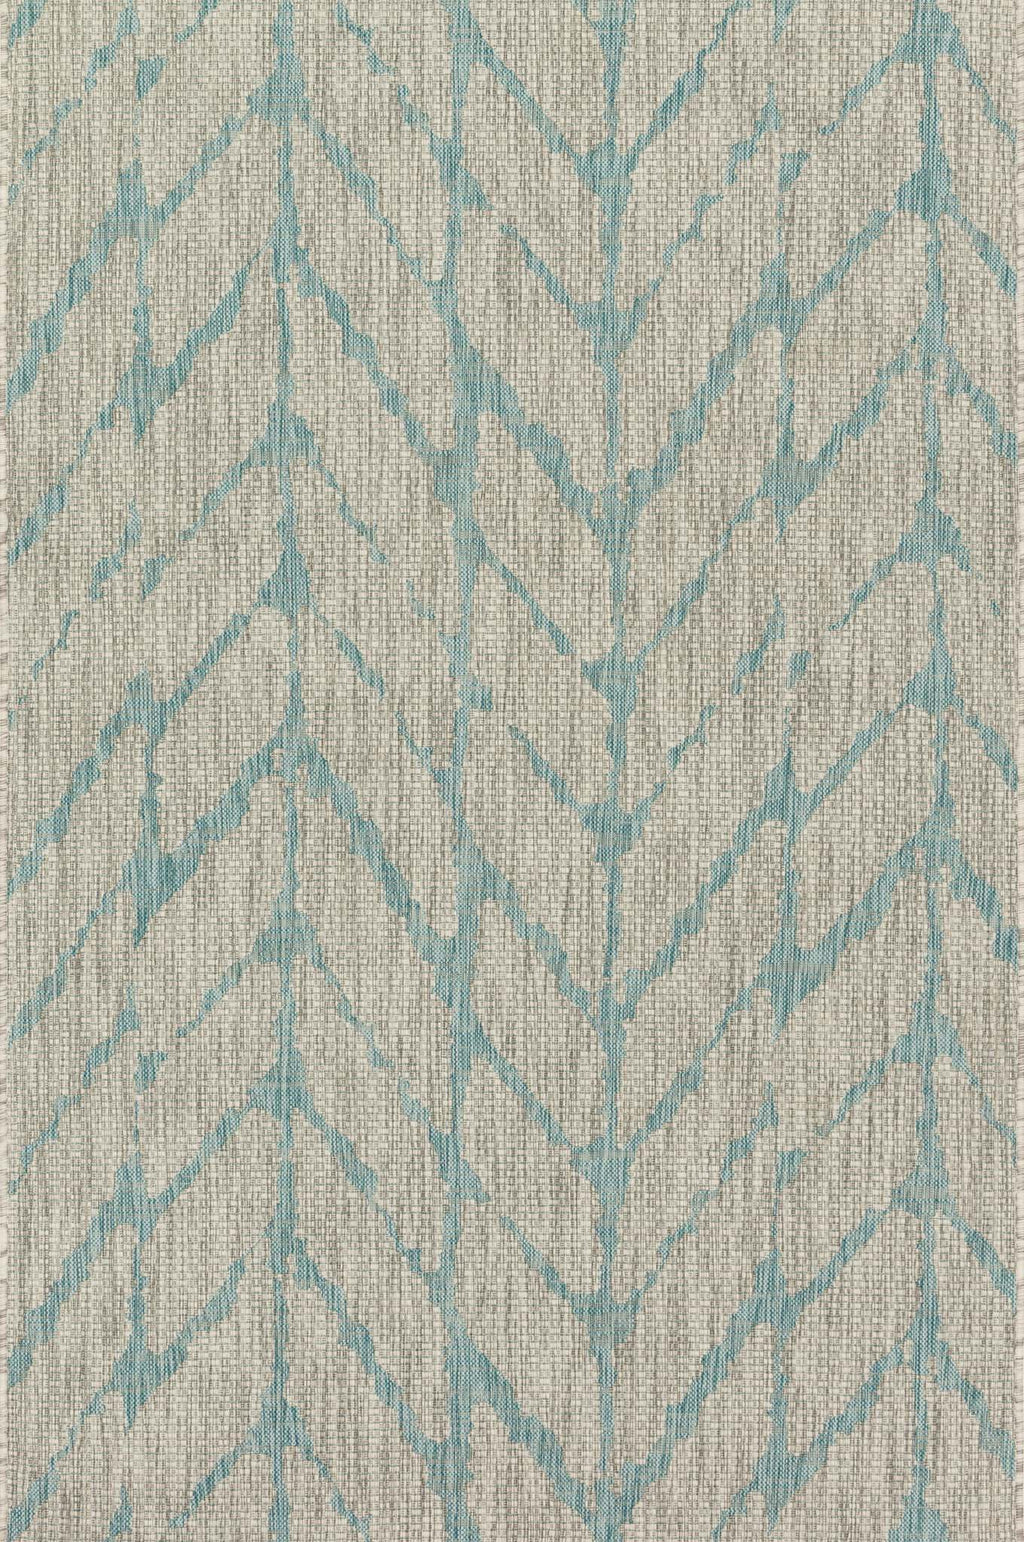 ISLE Collection Rug  in  MIST / AQUA Beige Small Power-Loomed Polypropylene